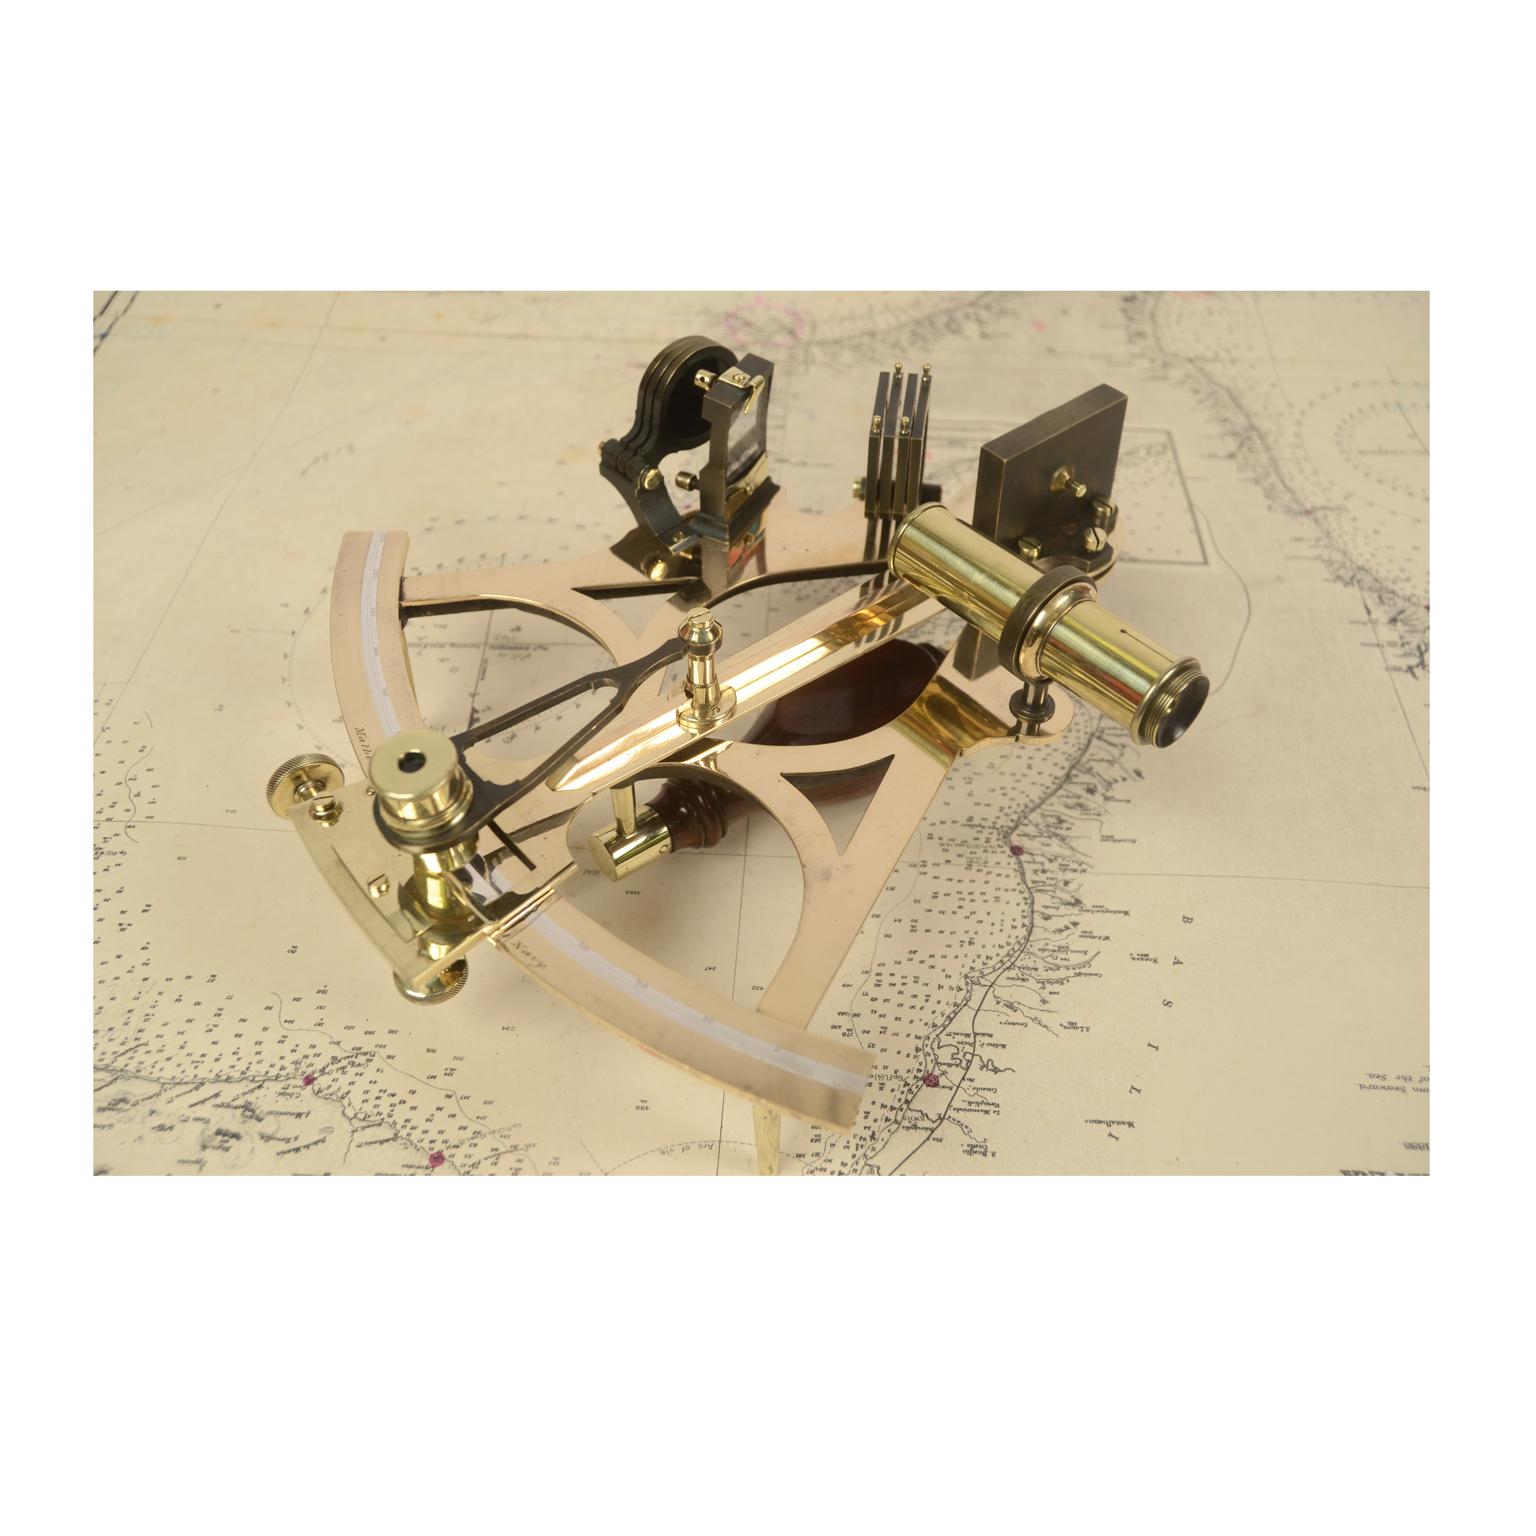 Mid-19th Century Brass Sextant from the Second Half of the 19th Century by Matheson & Co